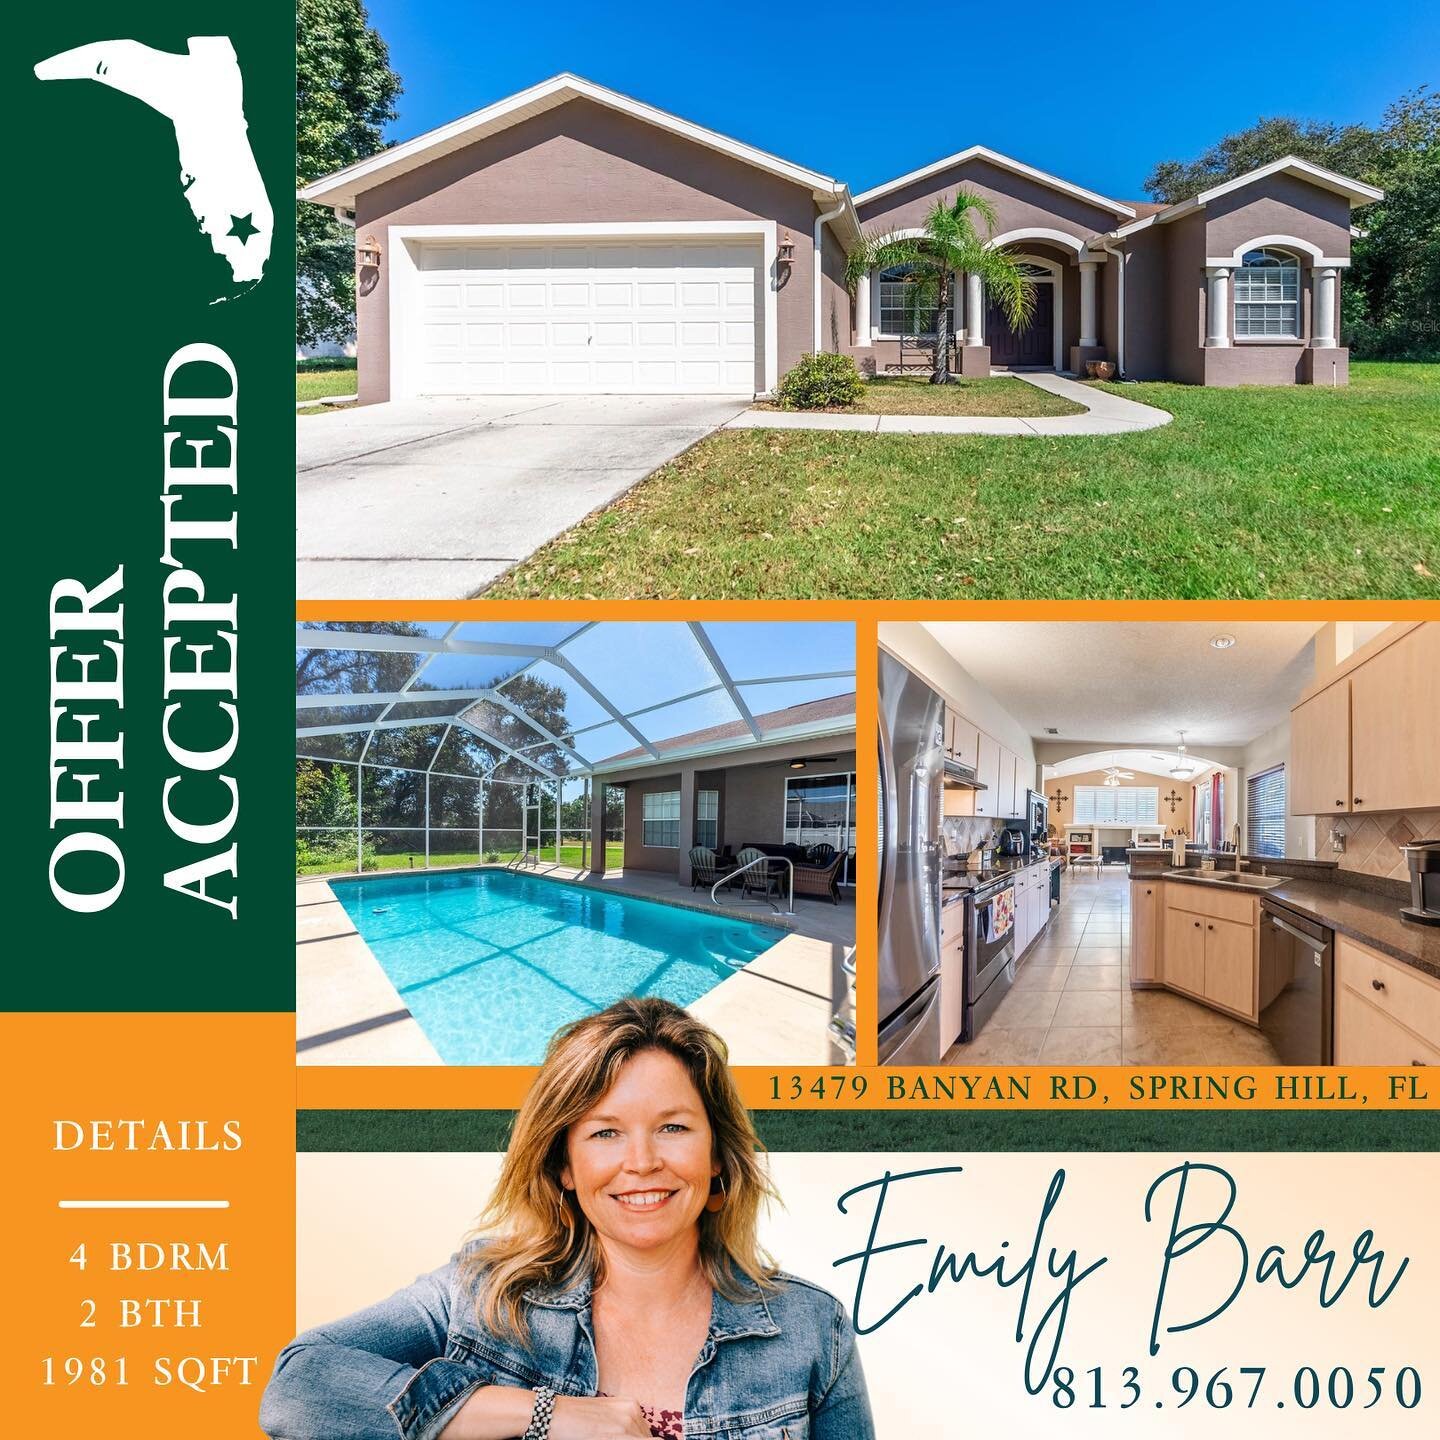 Congratulations to Emily and her Buyer Customers on getting their Offer Accepted on this perfect Florida home! 

This beautiful home features 4 bedroom, 2 bathroom, 2 car garage, gorgeous in-ground fully screened enclosed pool, with new finish, lanai